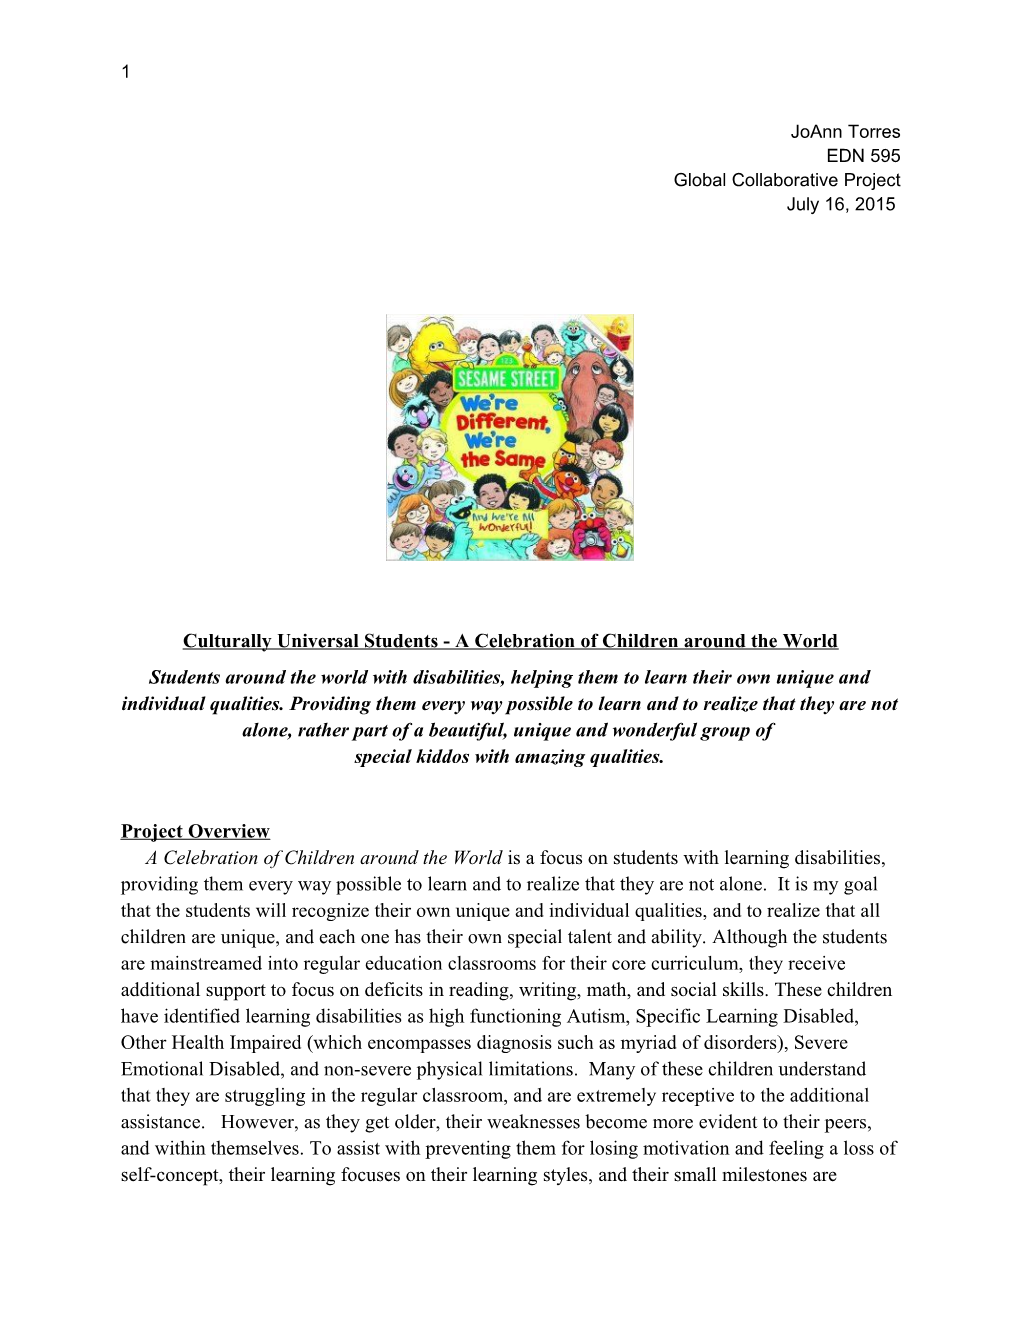 Culturally Universal Students - a Celebration of Children Around the World